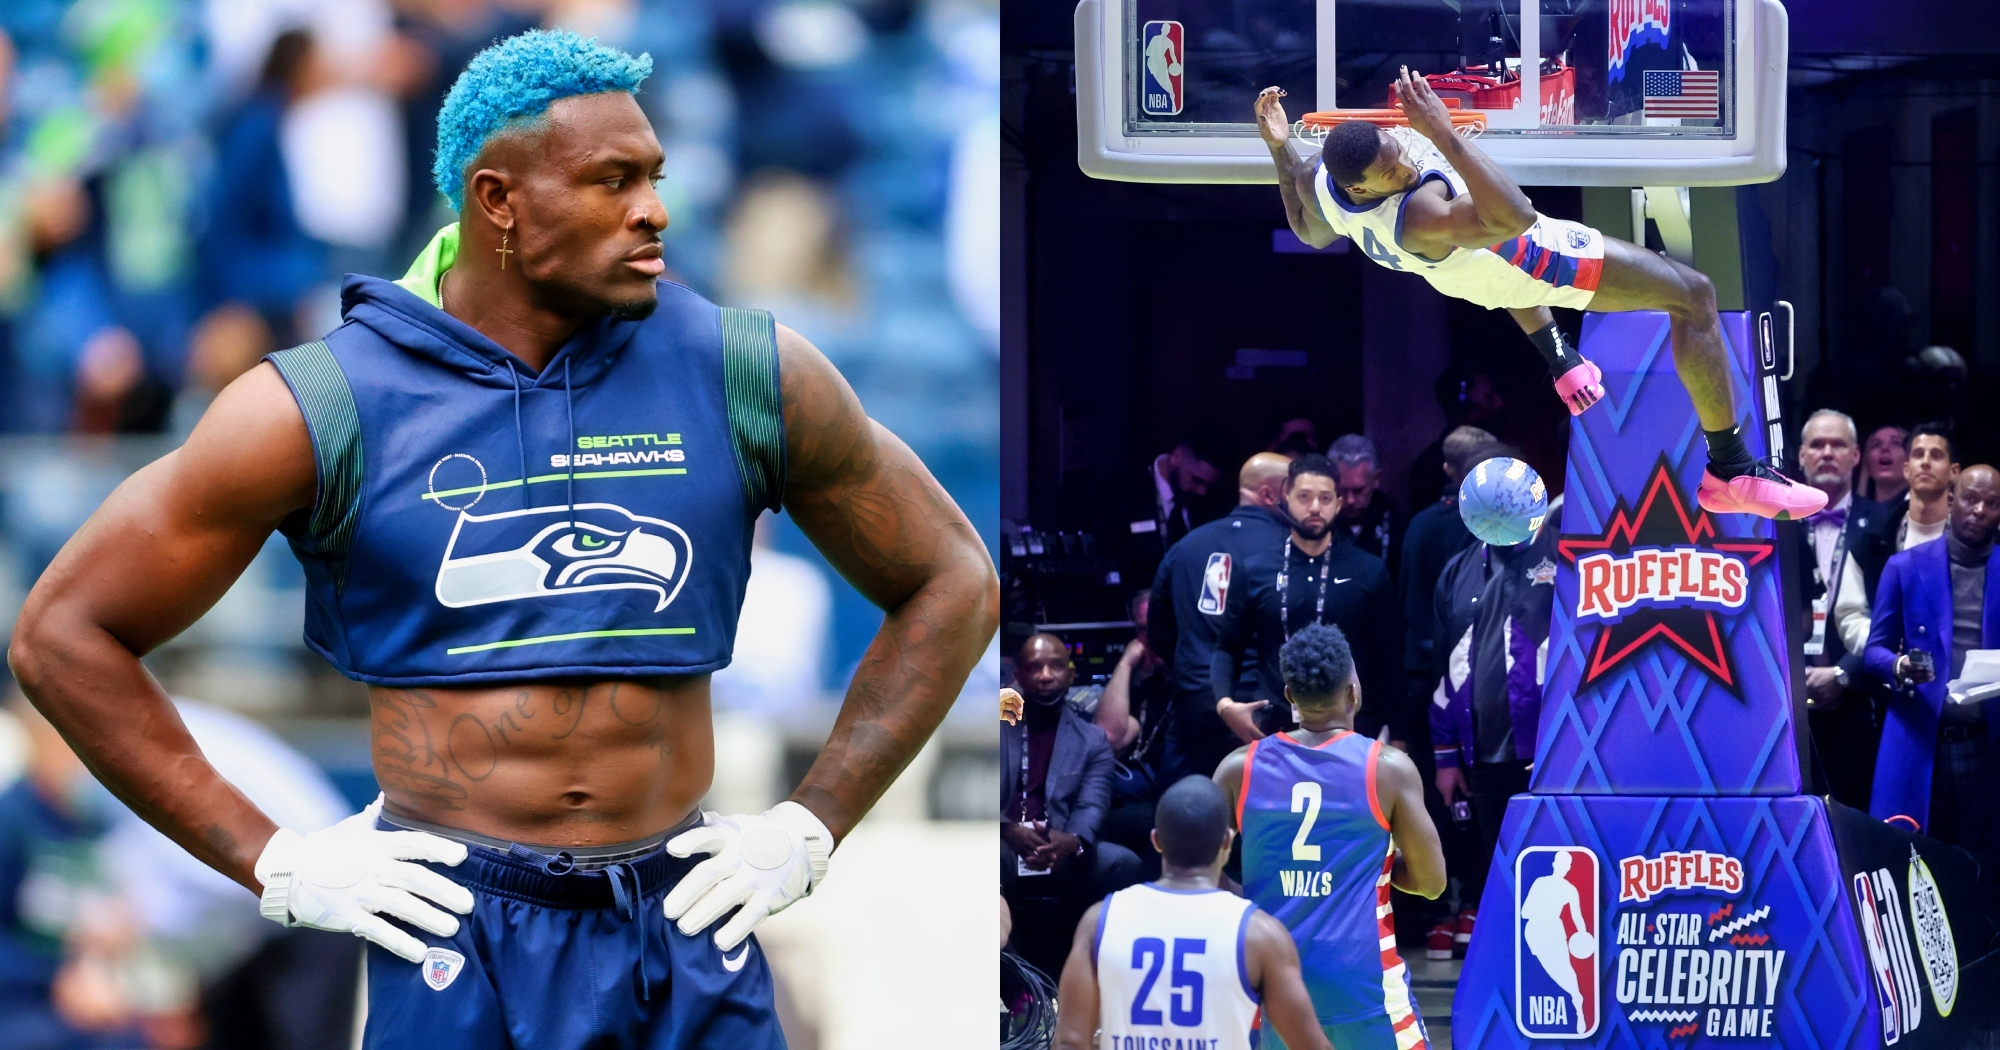 NFL star DK Metcalf leads 'Team Dwyane' to Celebrity Game victory